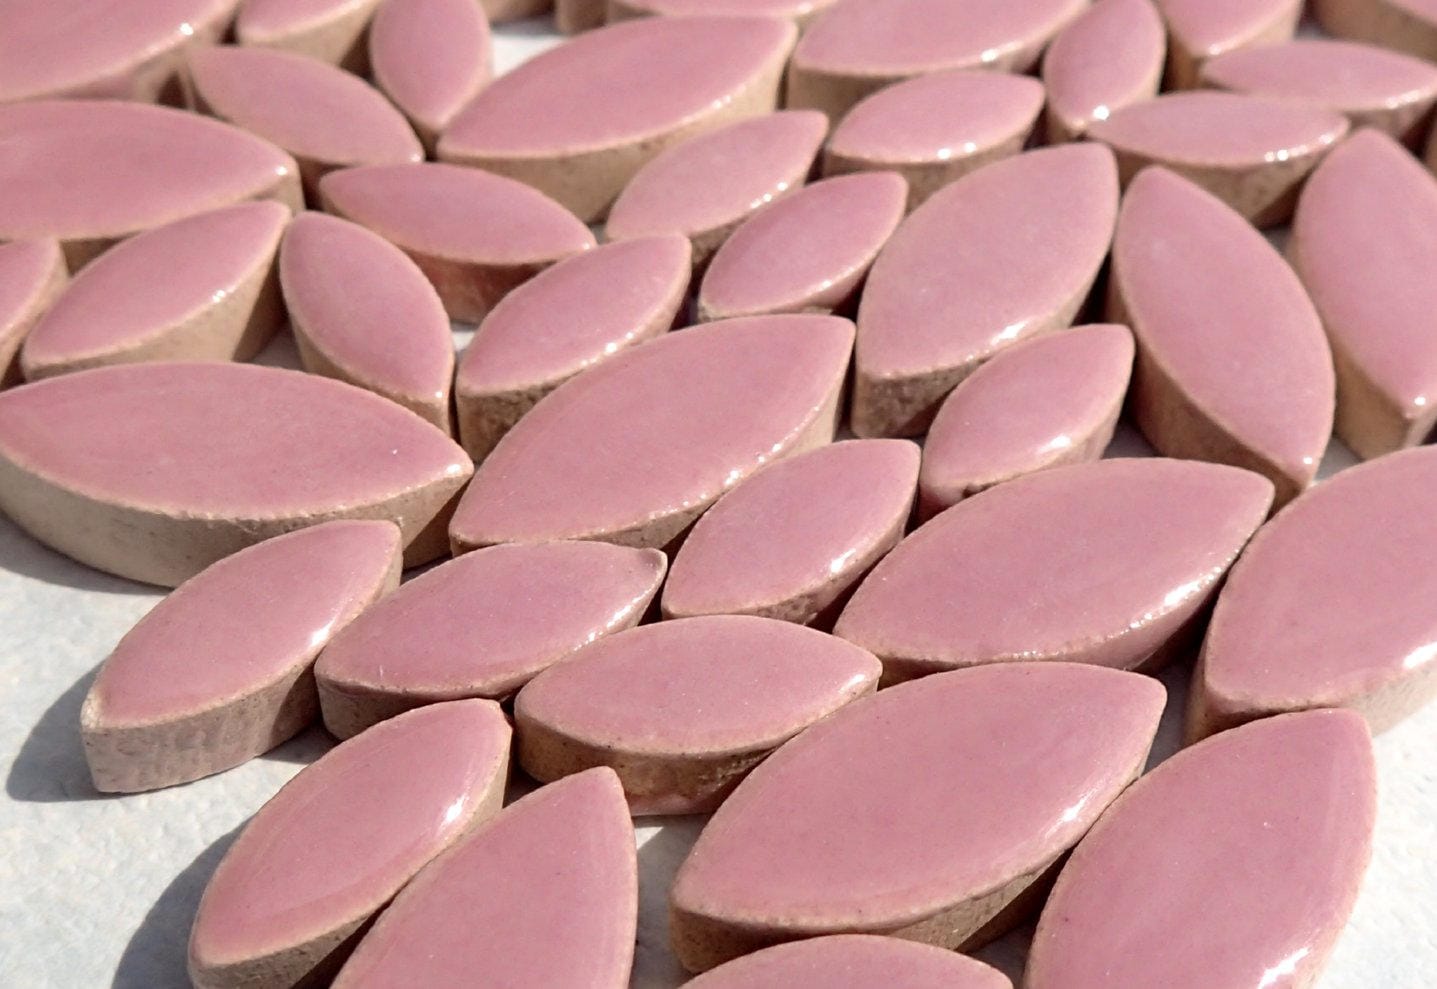 Lilac Petals Mosaic Tiles - 50g Ceramic Leaves in Mix of 2 Sizes 1/2" and 3/4"